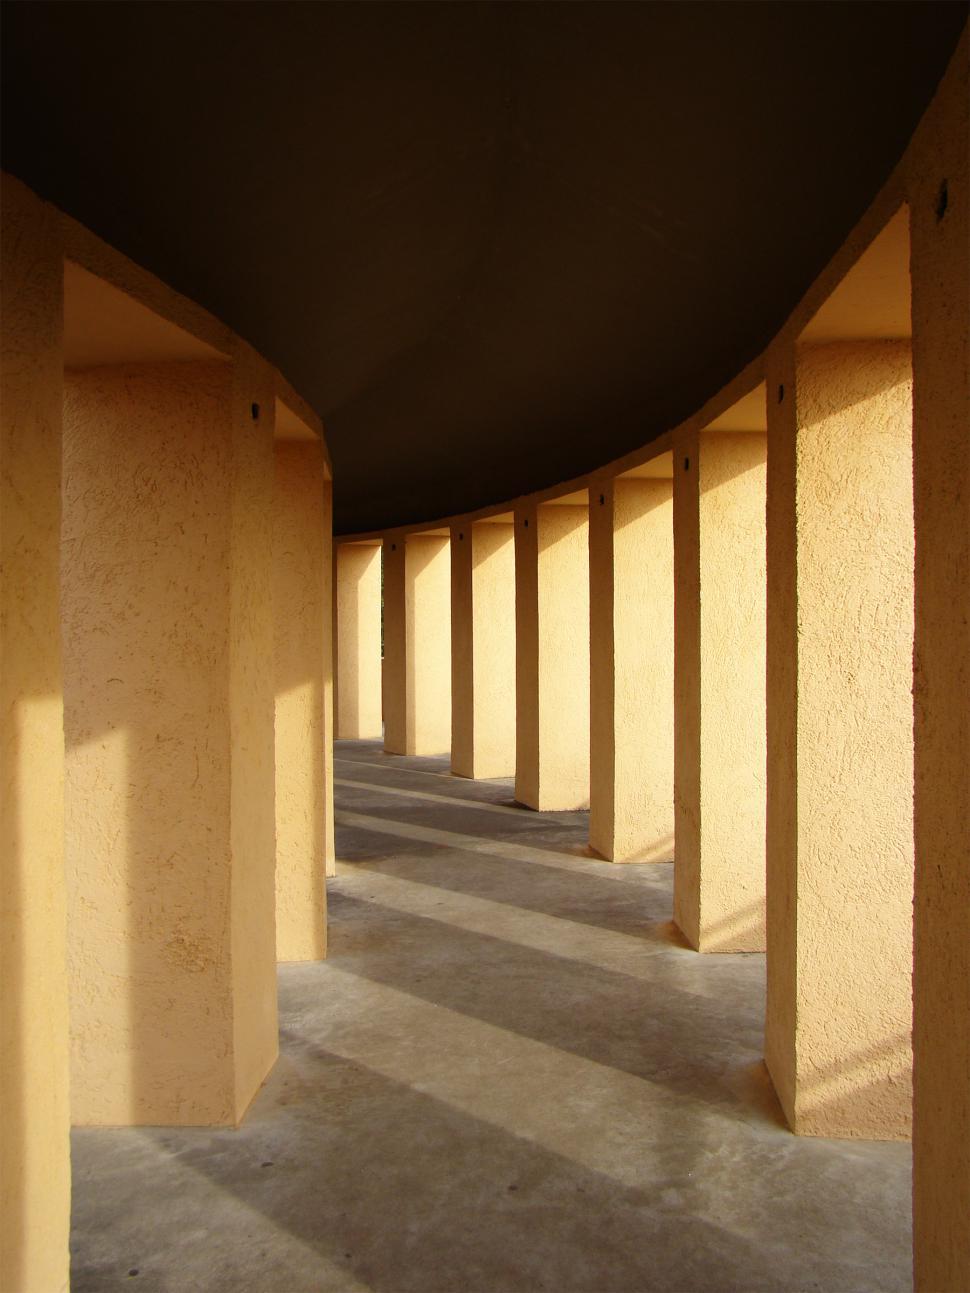 Free Image of Long Row of Concrete Pillars in a Building 